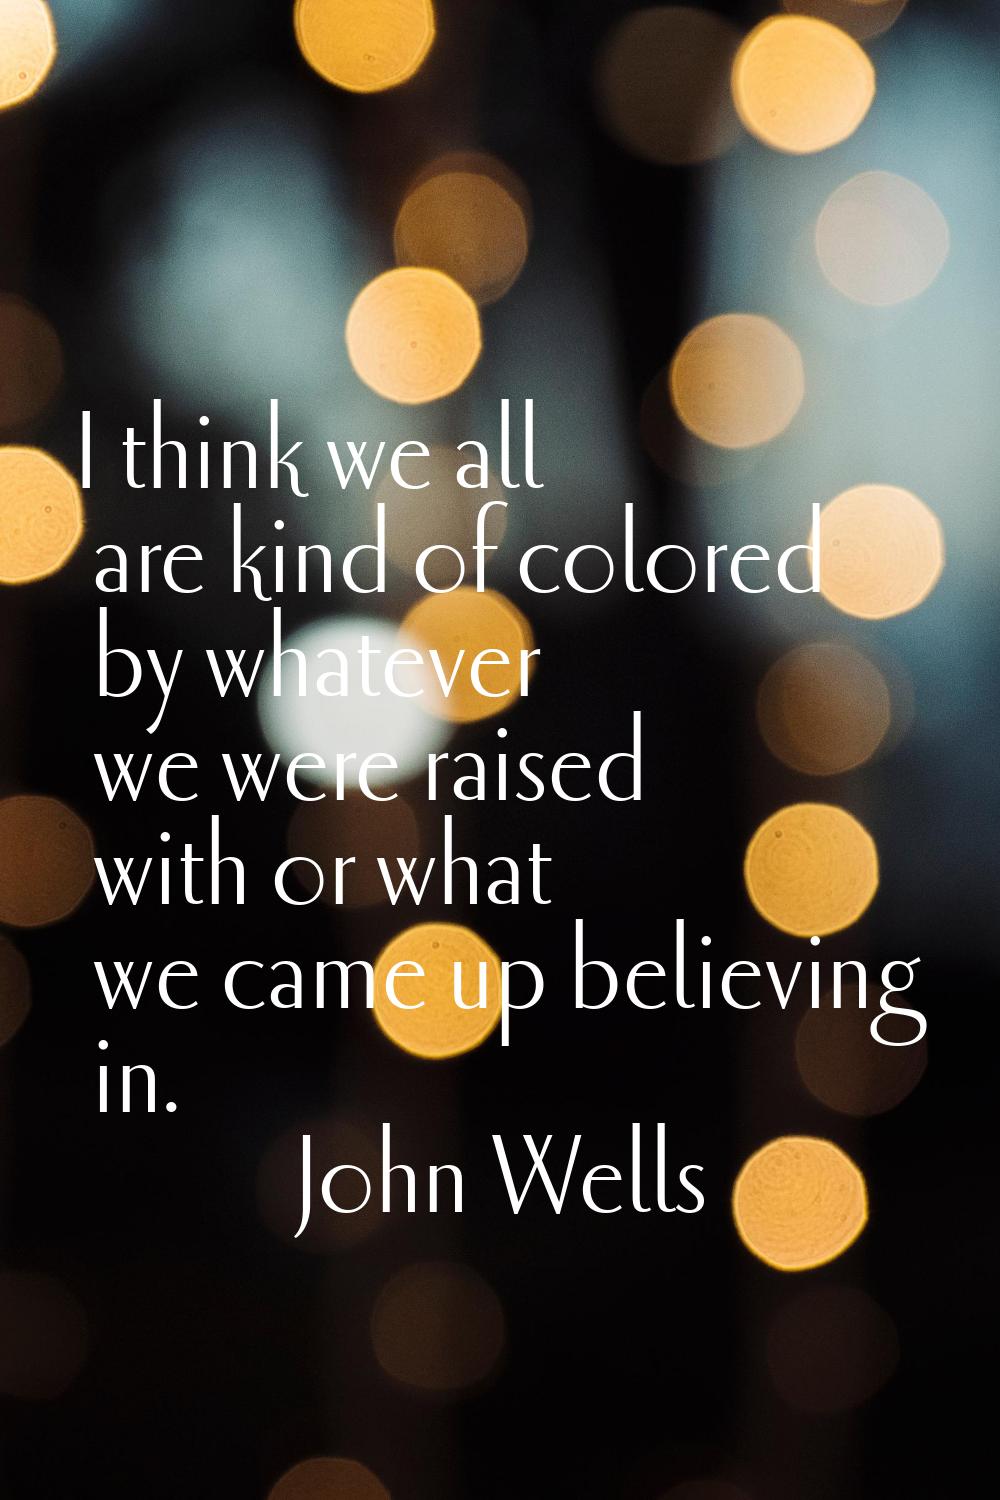 I think we all are kind of colored by whatever we were raised with or what we came up believing in.